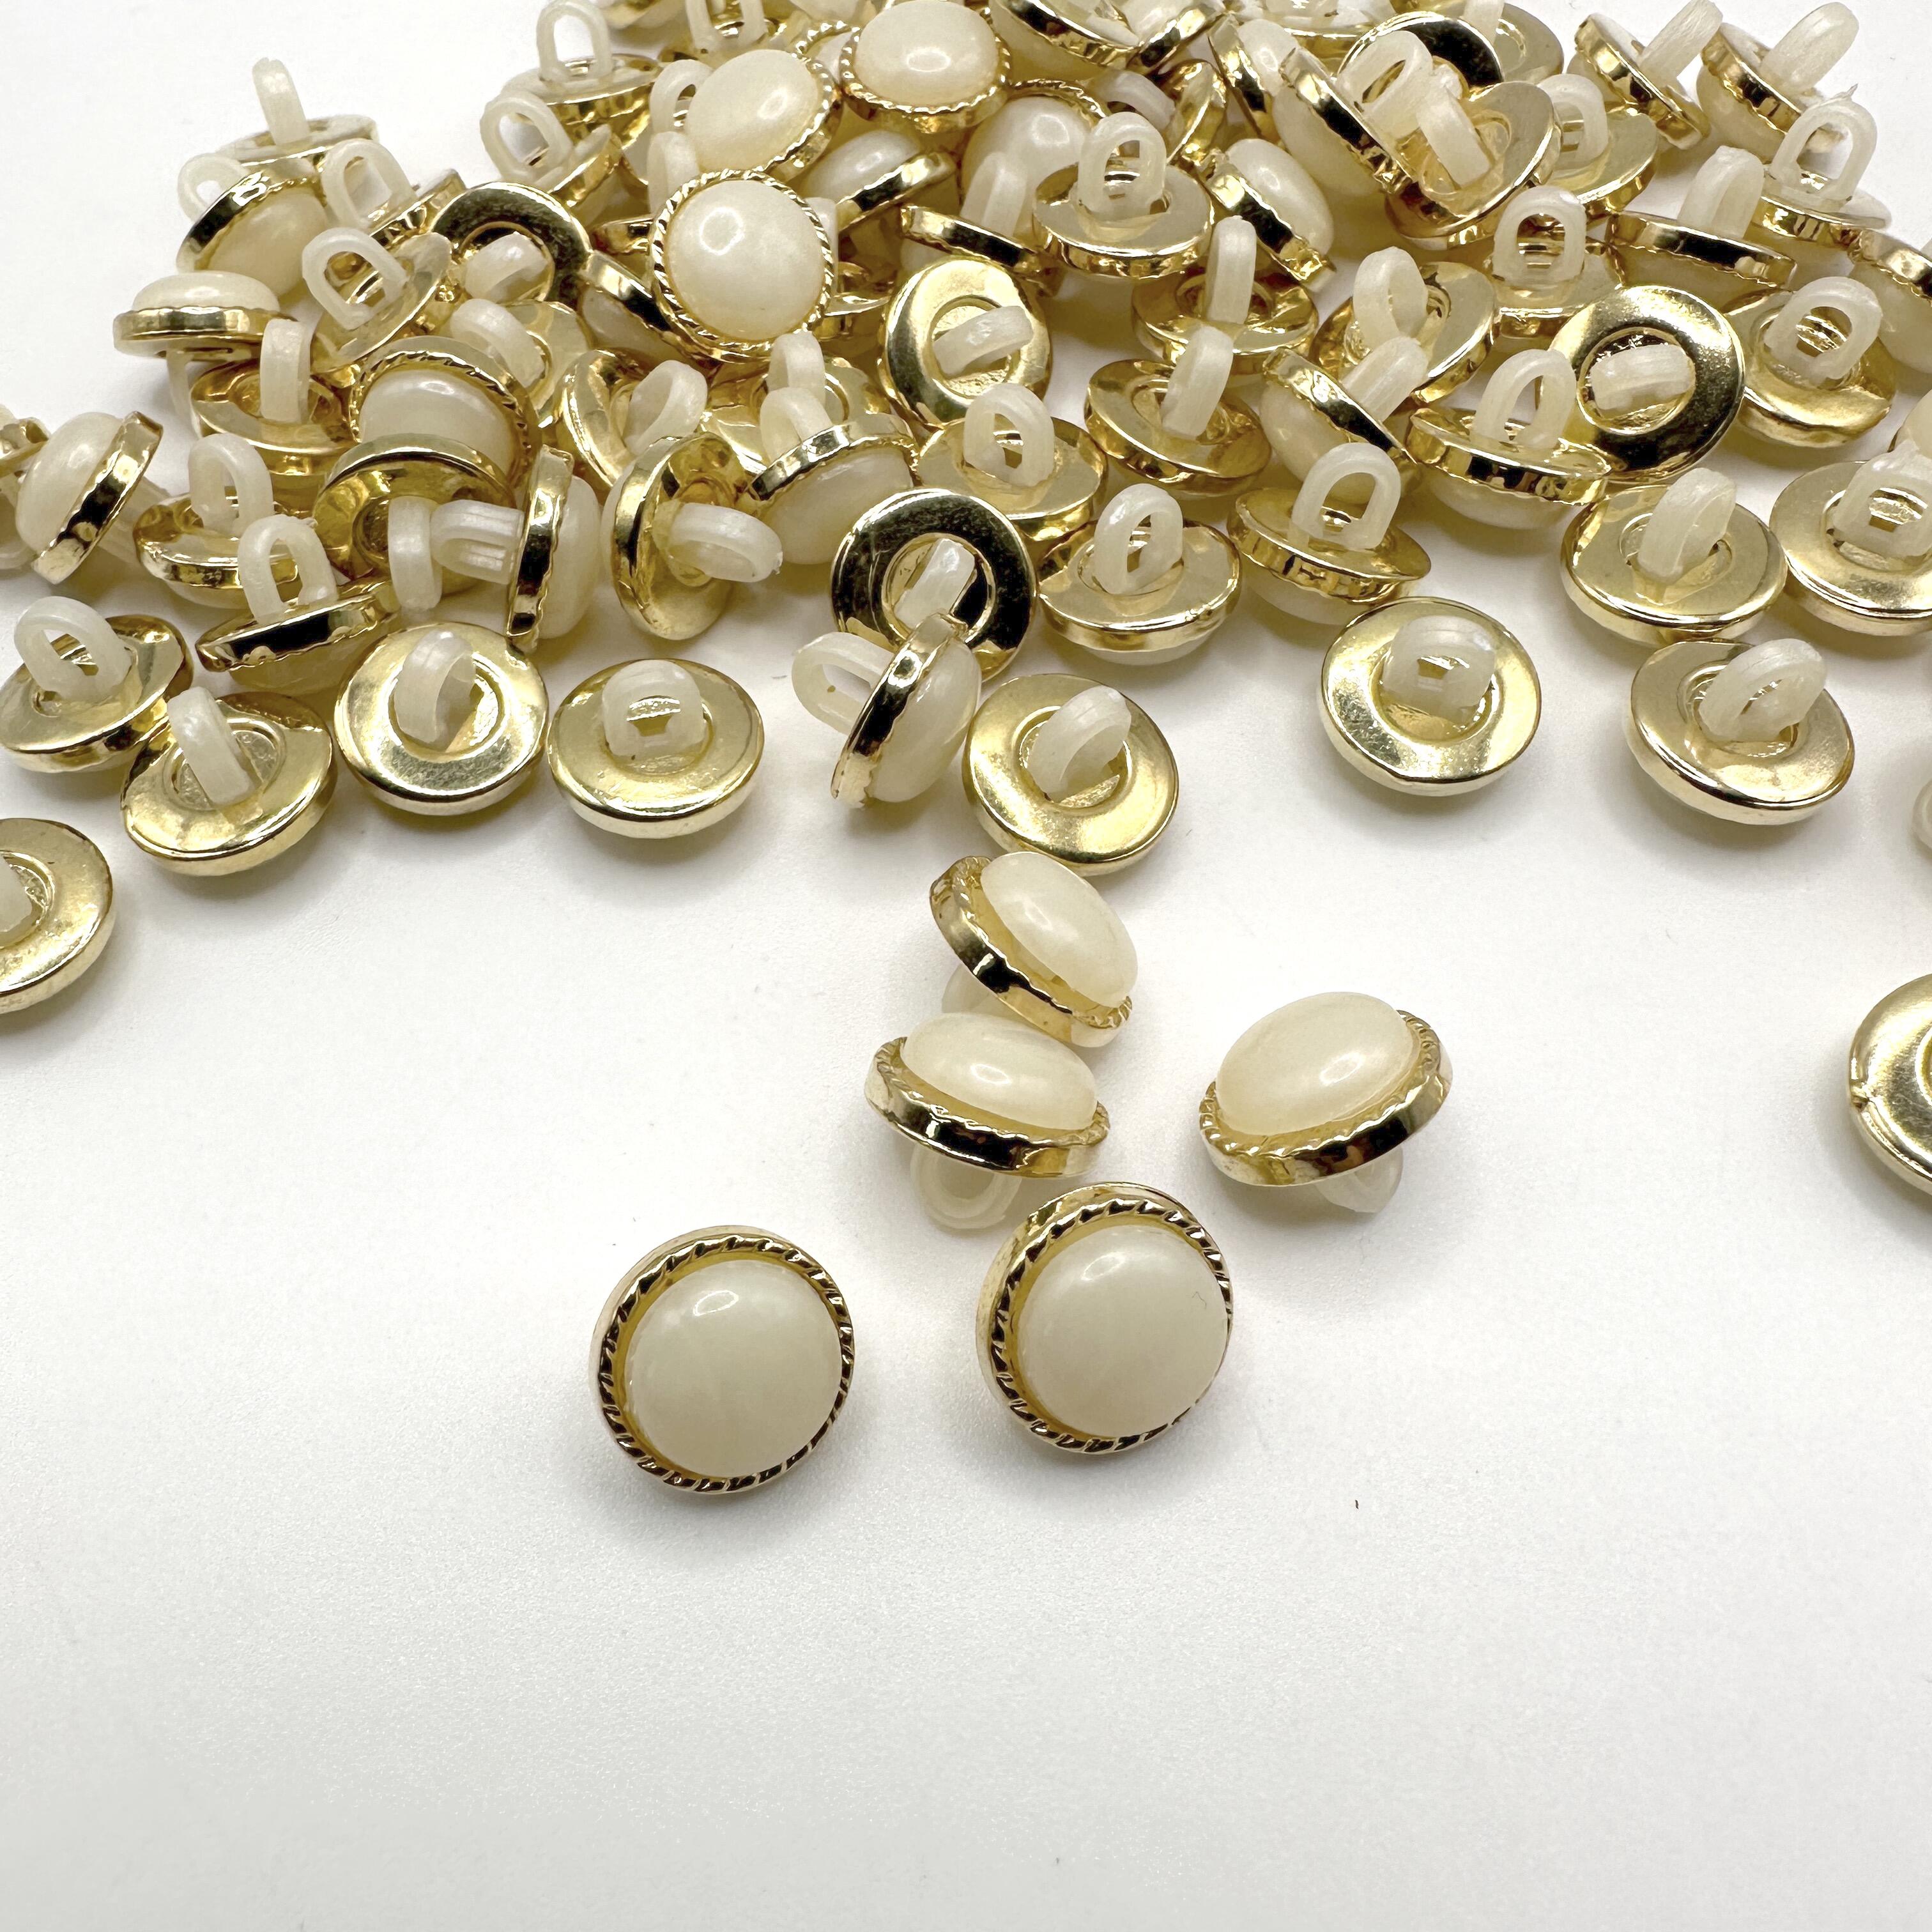 Pearl Bridal Buttons with Metal Shanks